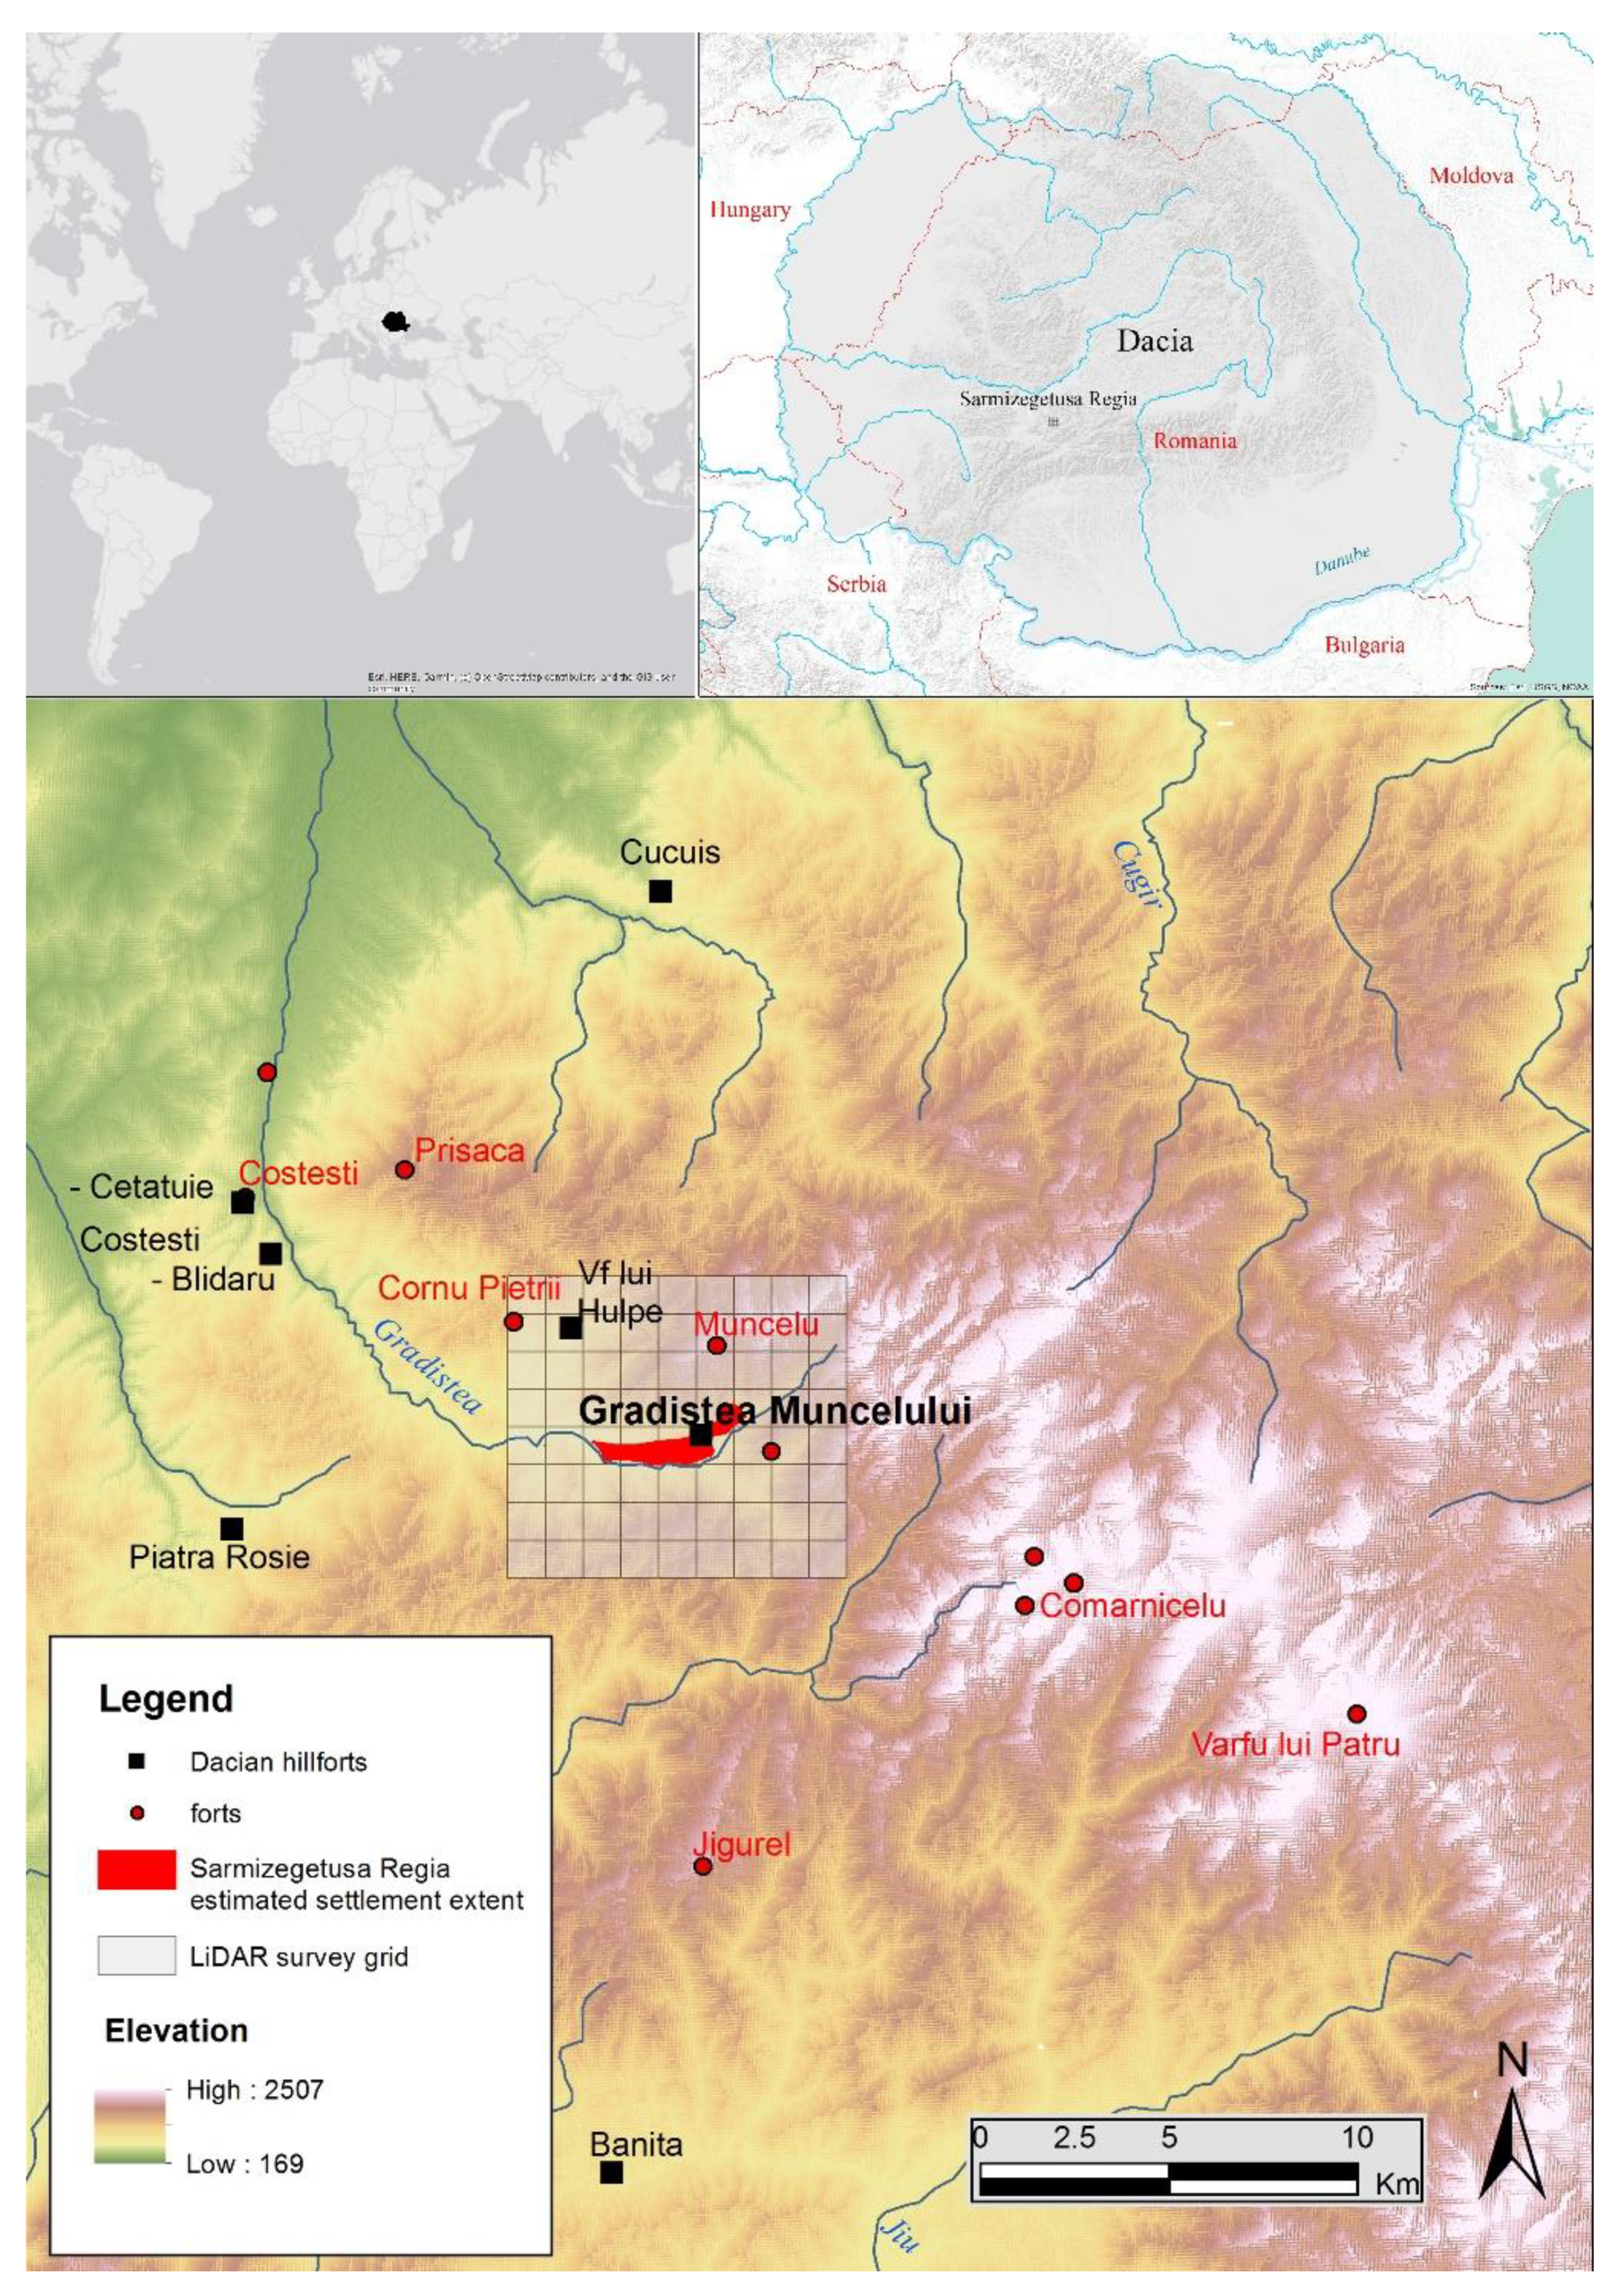 Geosciences | Free Full-Text | GIS Analysis and Spatial Networking Patterns  in Upland Ancient Warfare: The Roman Conquest of Dacia